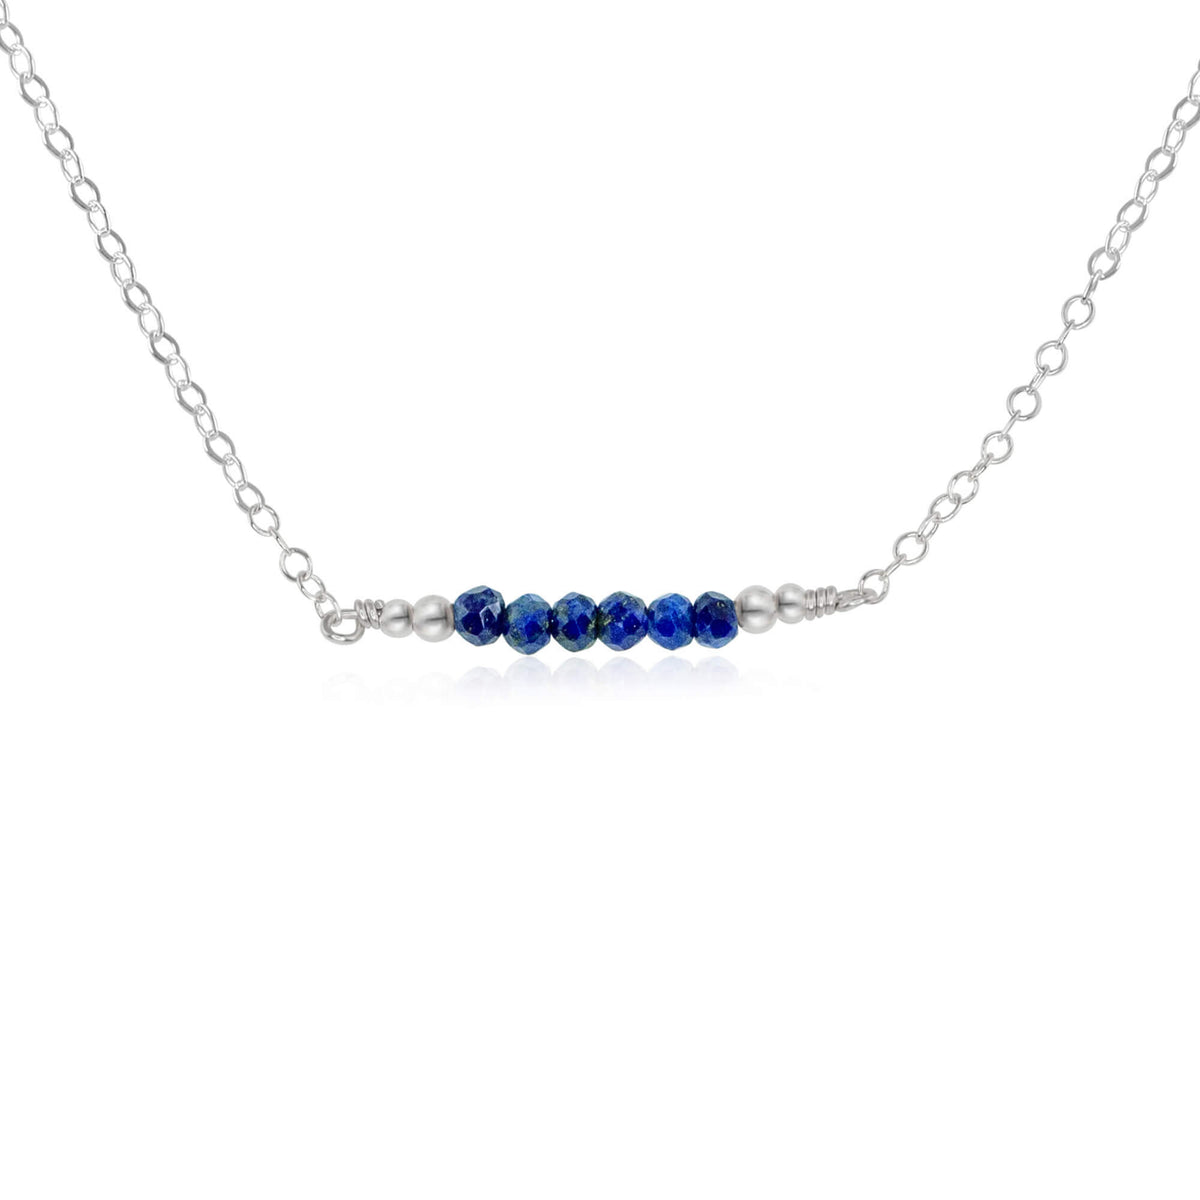 Faceted Bead Bar Necklace - Lapis Lazuli - Sterling Silver - Luna Tide Handmade Jewellery